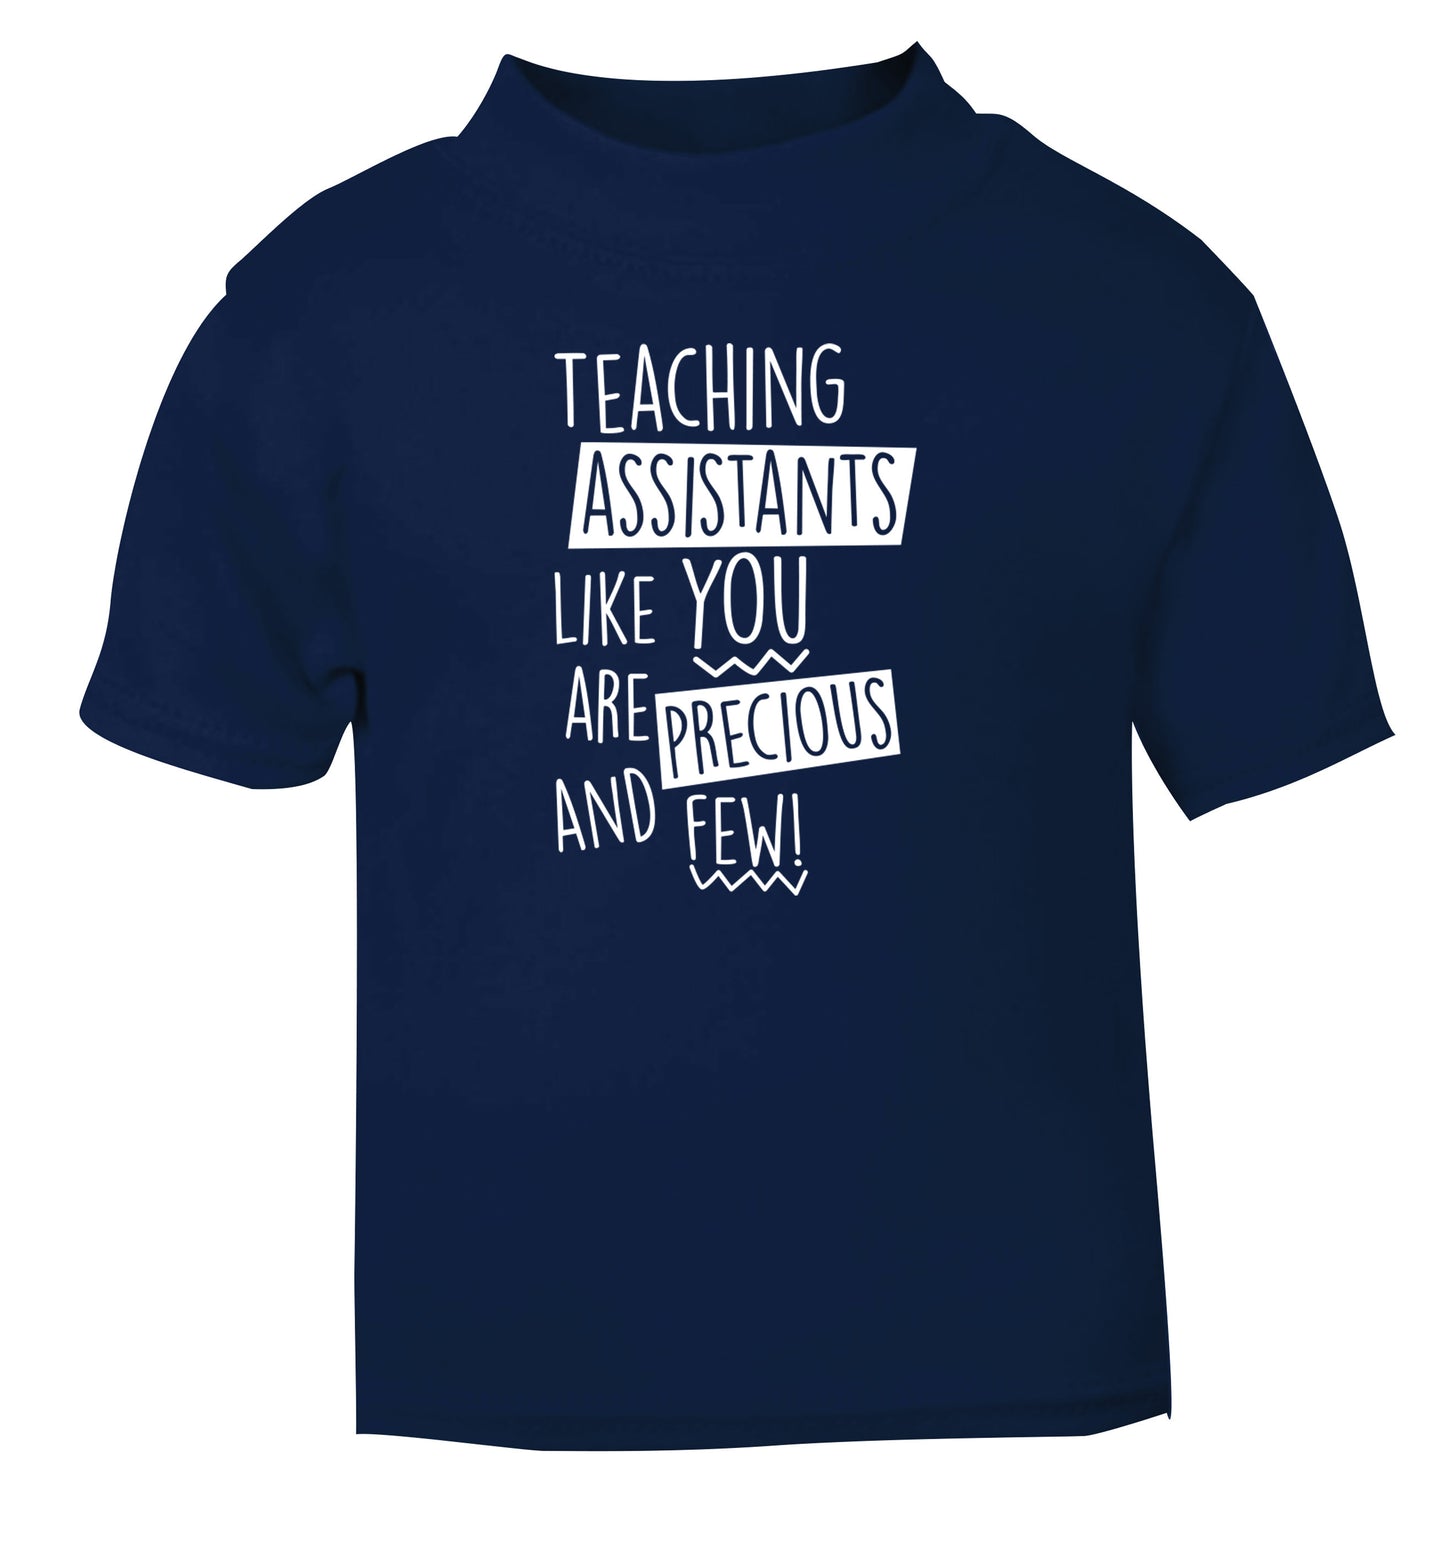 Teaching assistants like you are previous and few! navy Baby Toddler Tshirt 2 Years